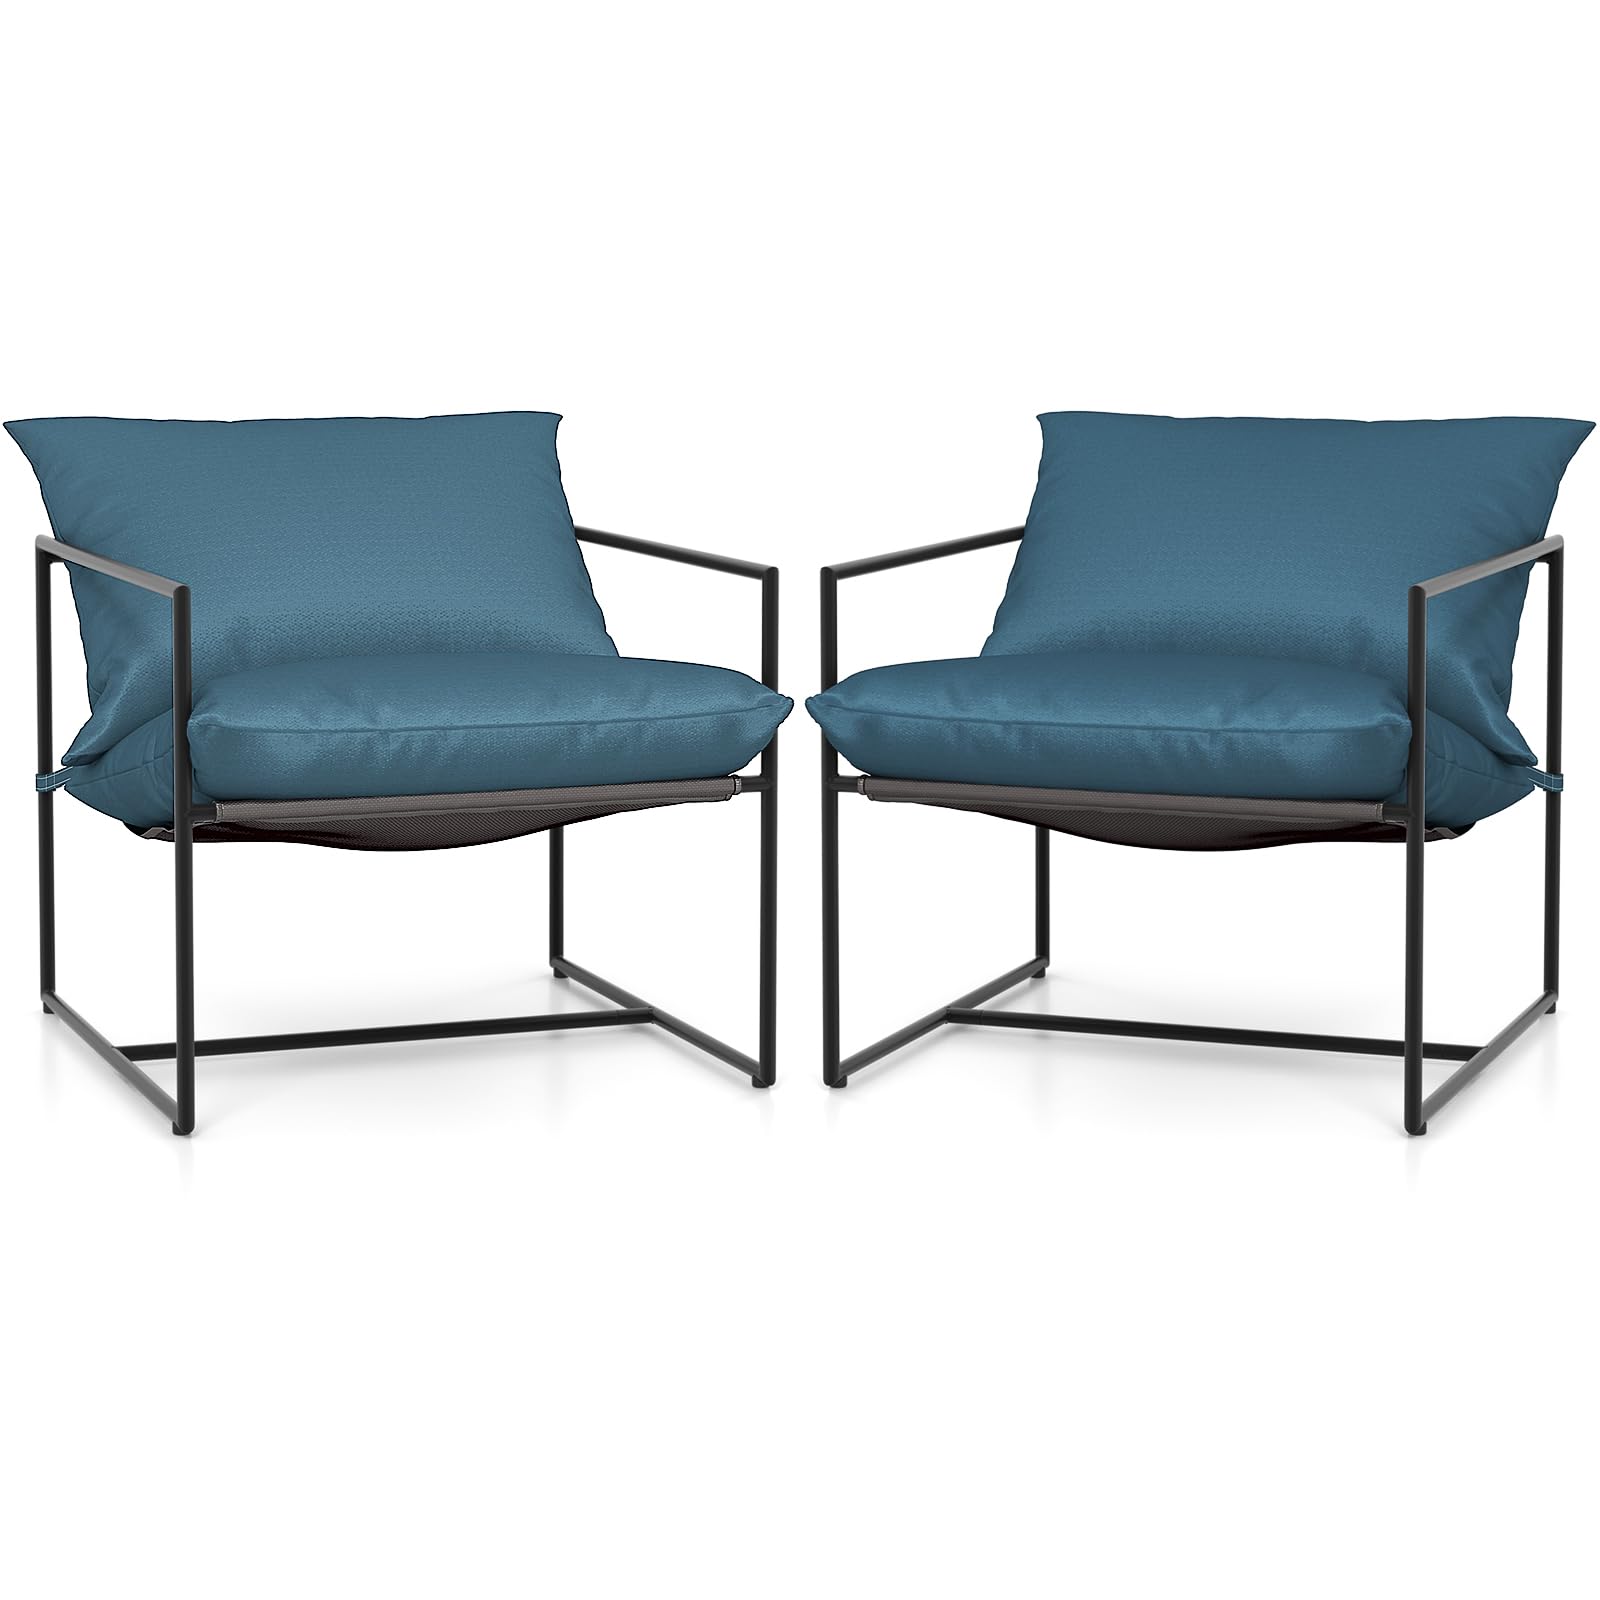 Giantex Accent Chairs for Living Room - Metal Framed Armchair with Removable Sponge Cushion, Sling Accent Chair Set of 2